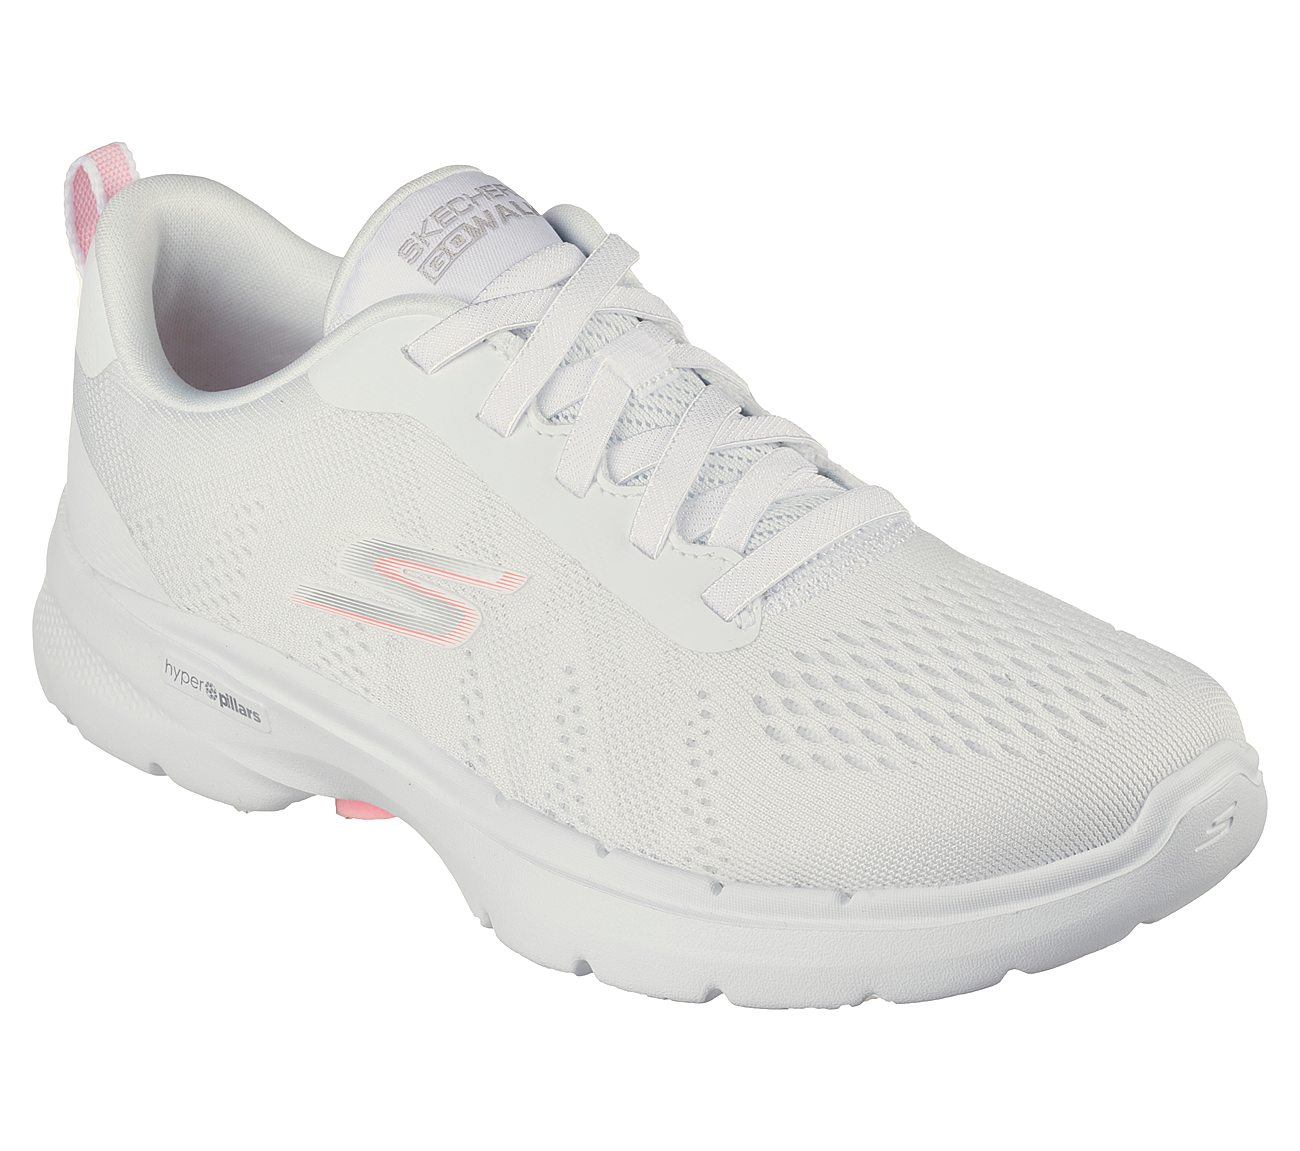 GO WALK 6, WHITE/PINK Footwear Right View